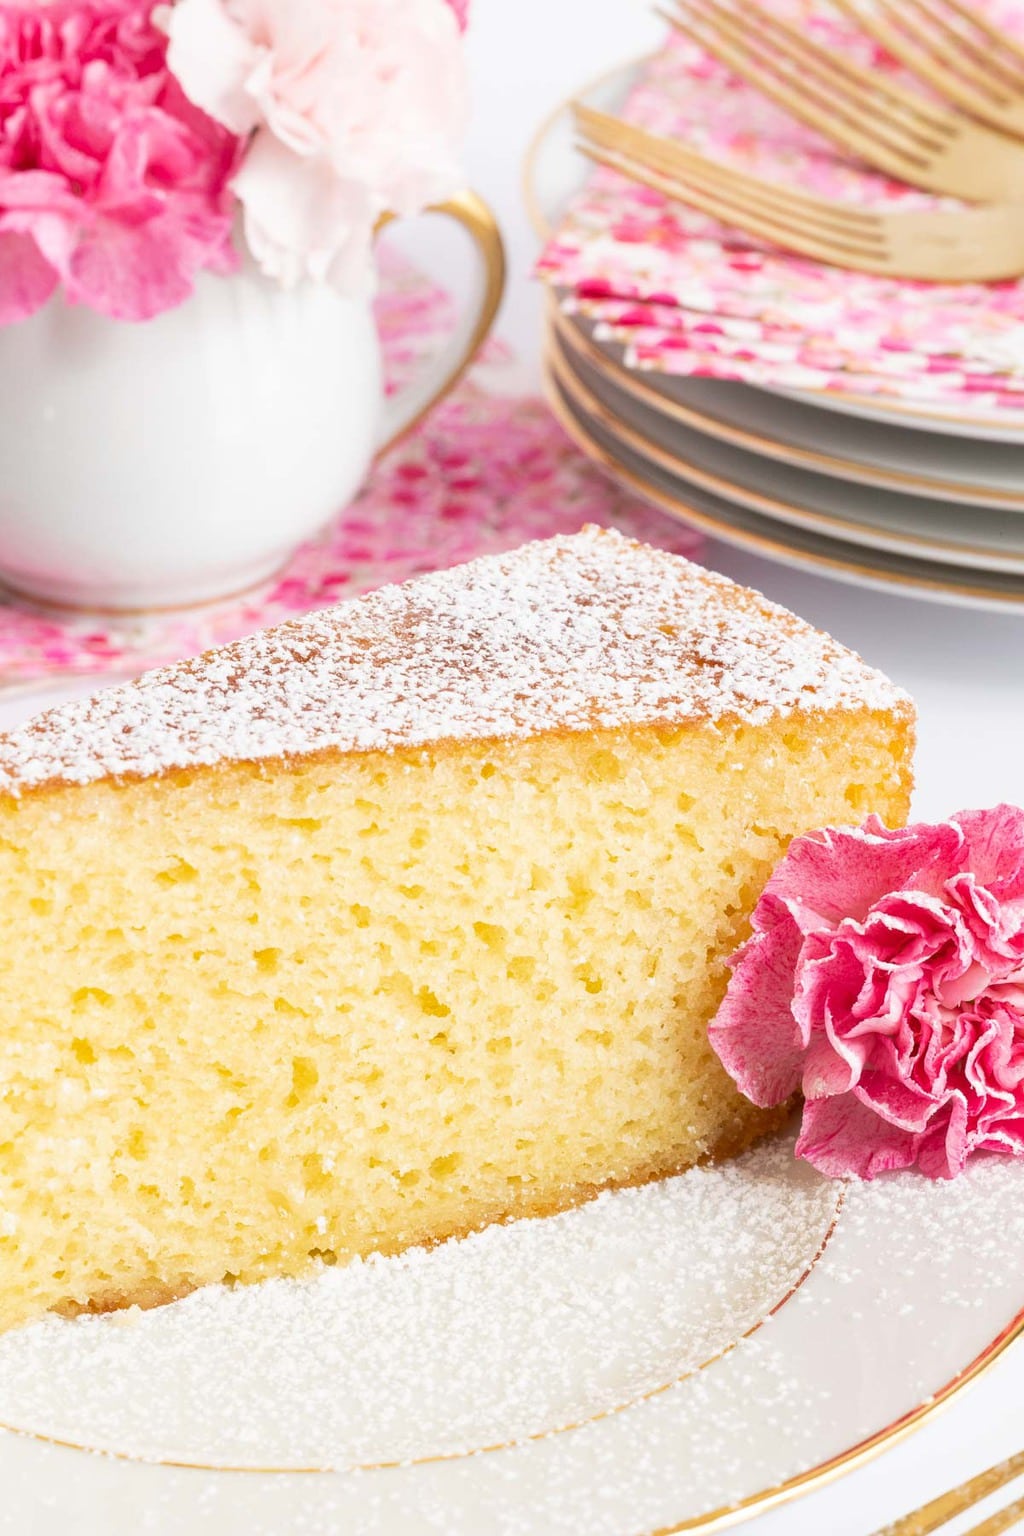 Vertical closeup photo of a slice of Ridiculously Easy French Butter Cake on a white and gold trimmed serving plate surrounded by pink carnation flowers.